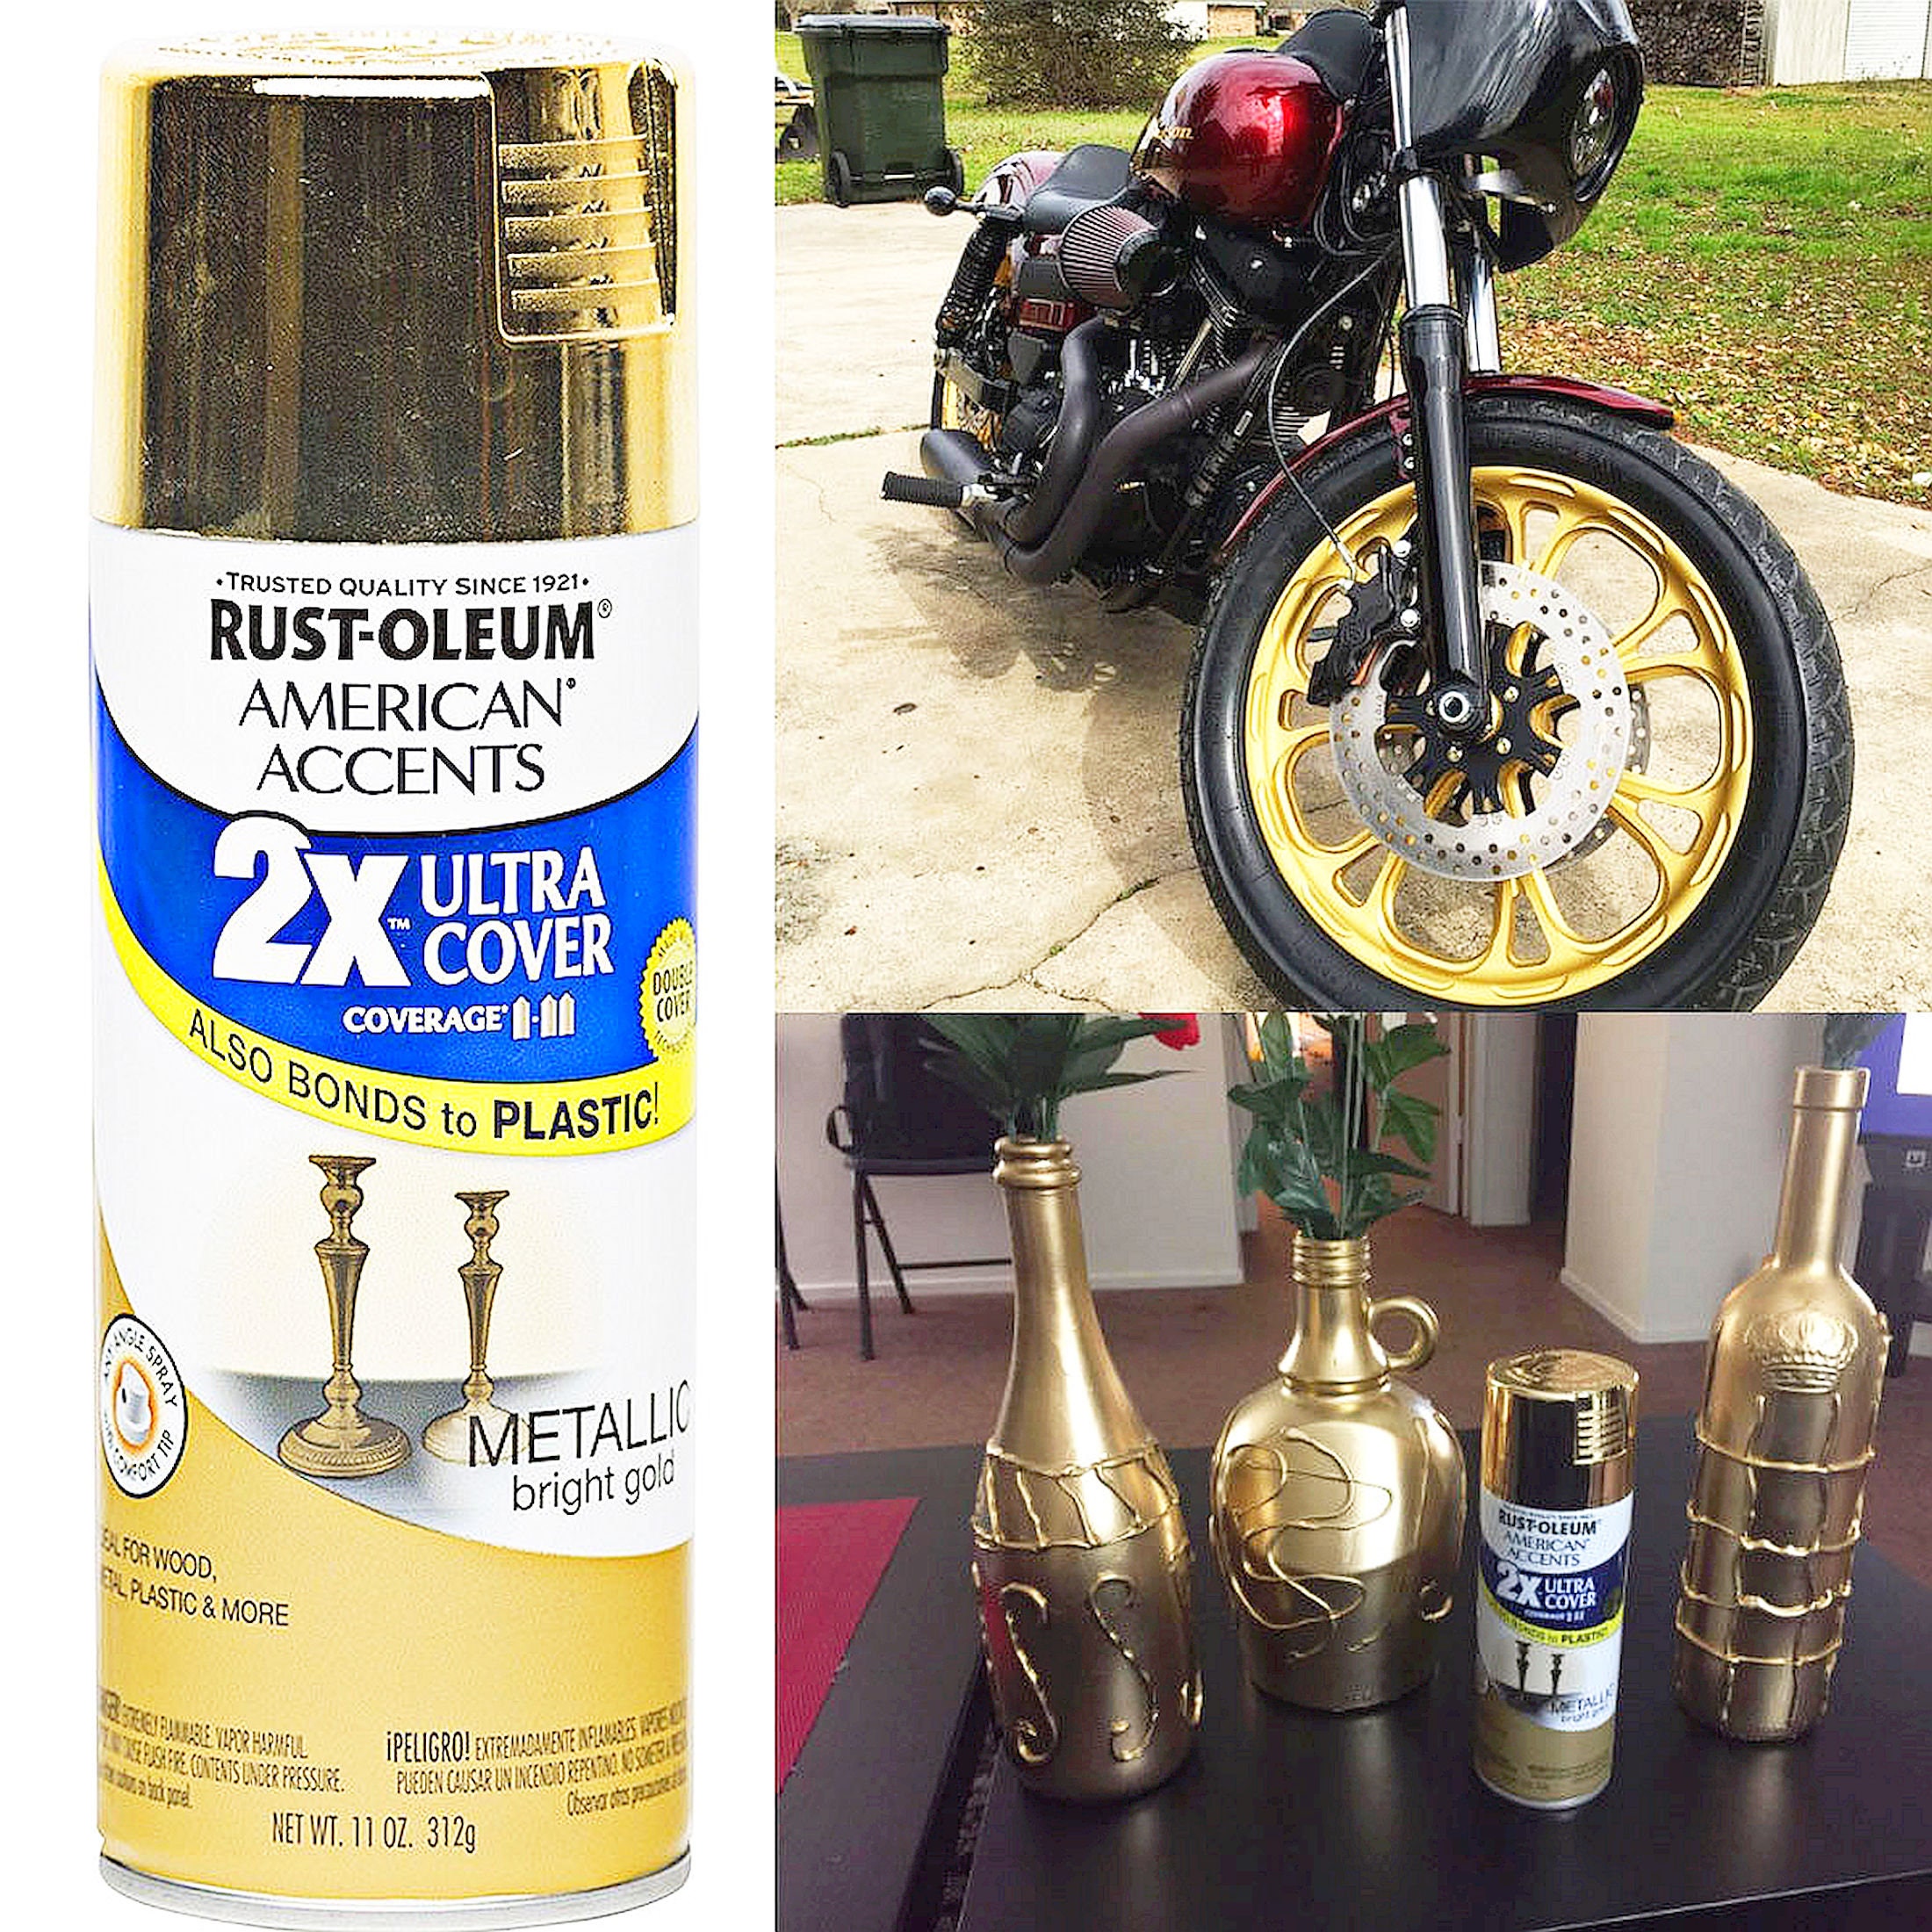 METALLIC GOLD Finish 11 Ounce Aerosol Spray Can Shiny Golden Paint AND  Primer Ultra Cover American Accents Rustoleum Rust-oleum 327909 